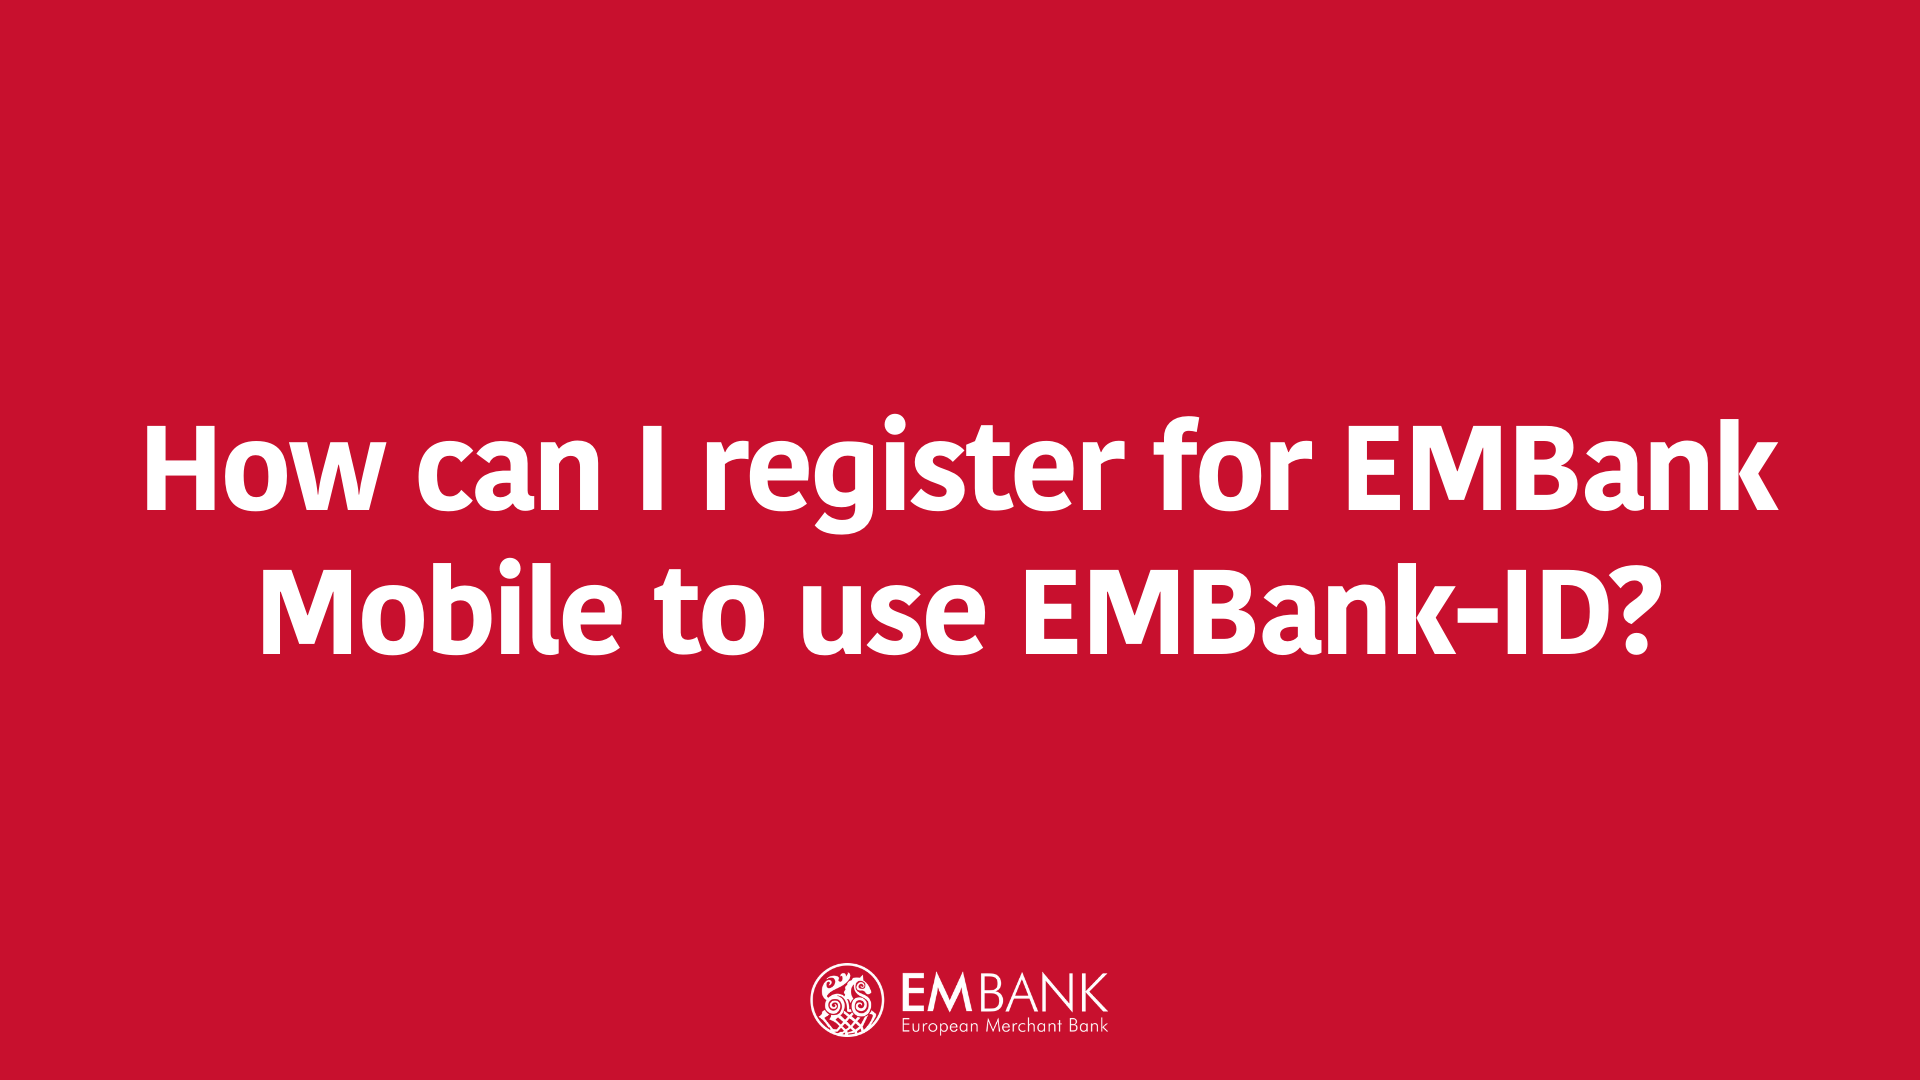 How can I register for EMBank Mobile to use EMBank-ID?